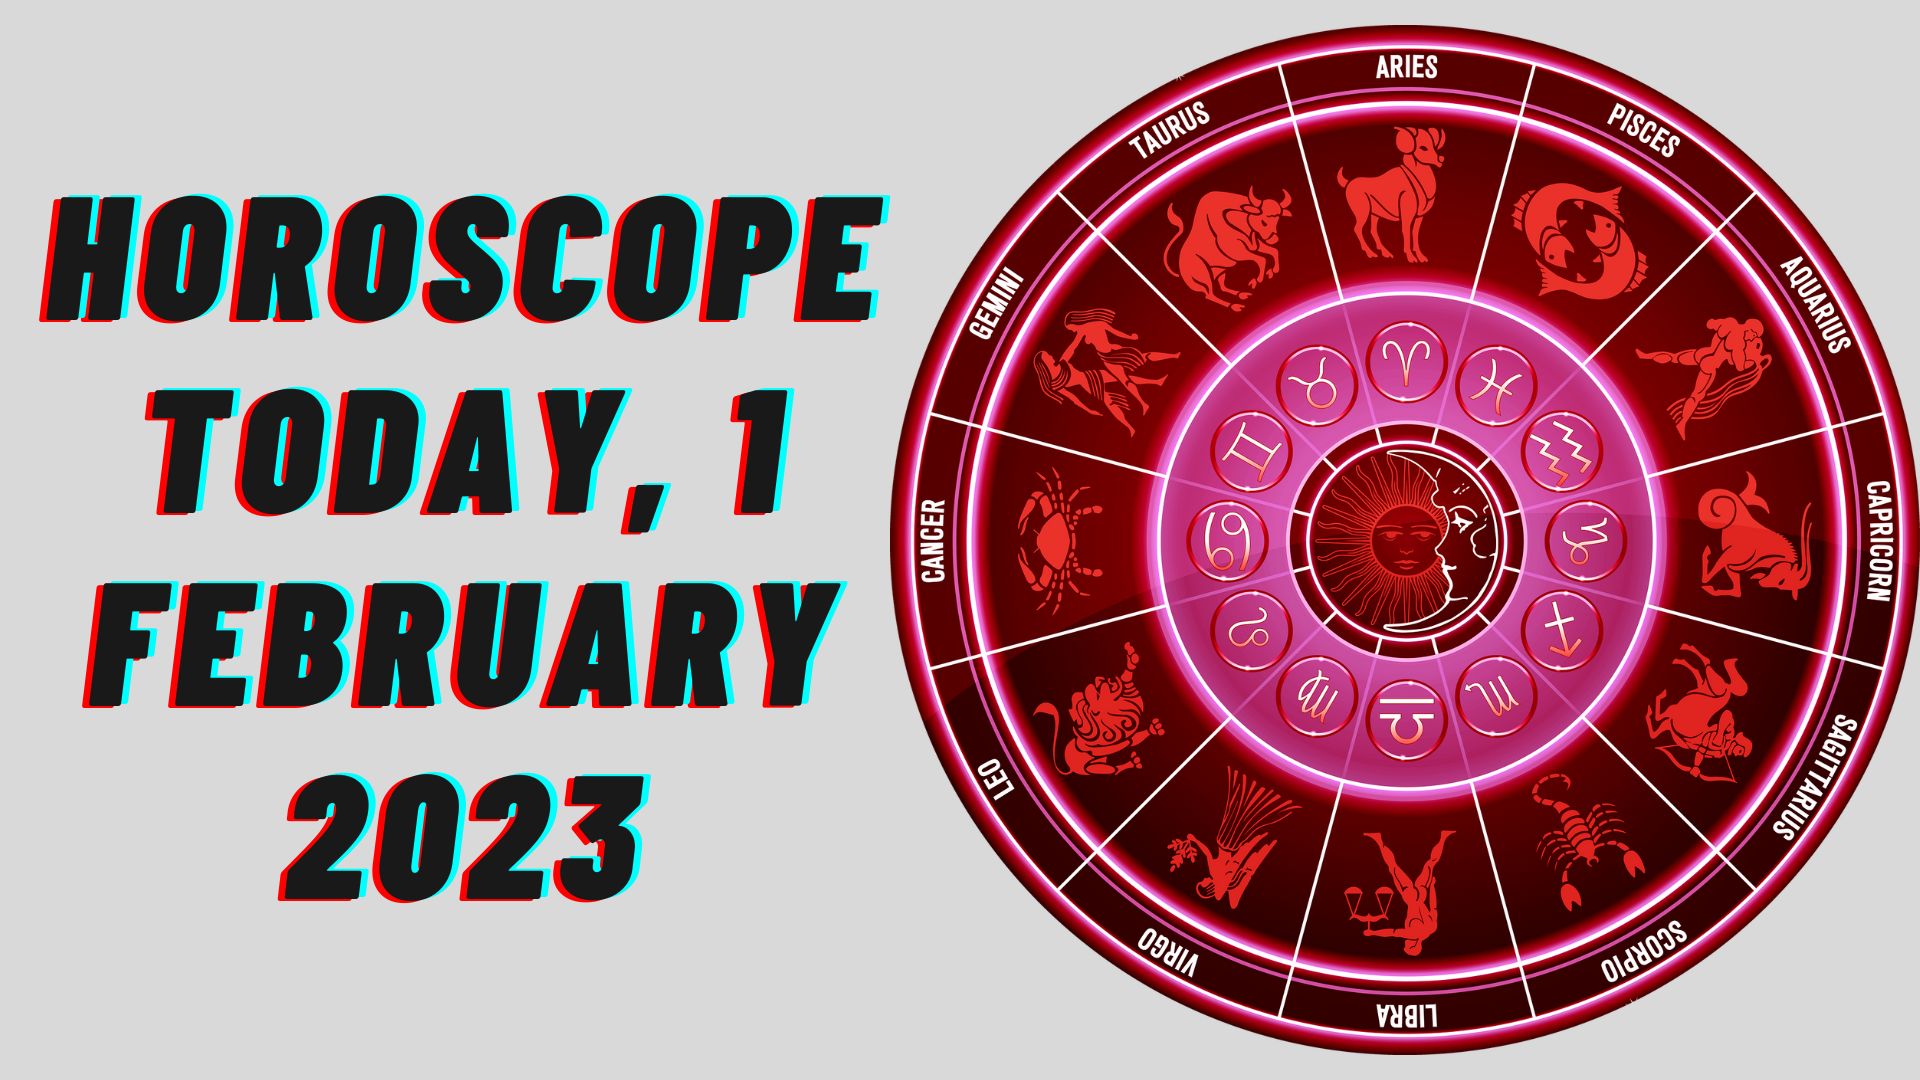 Horoscope Today, 1 February 2023 - Check Here Astrological Prediction For All Sun Signs